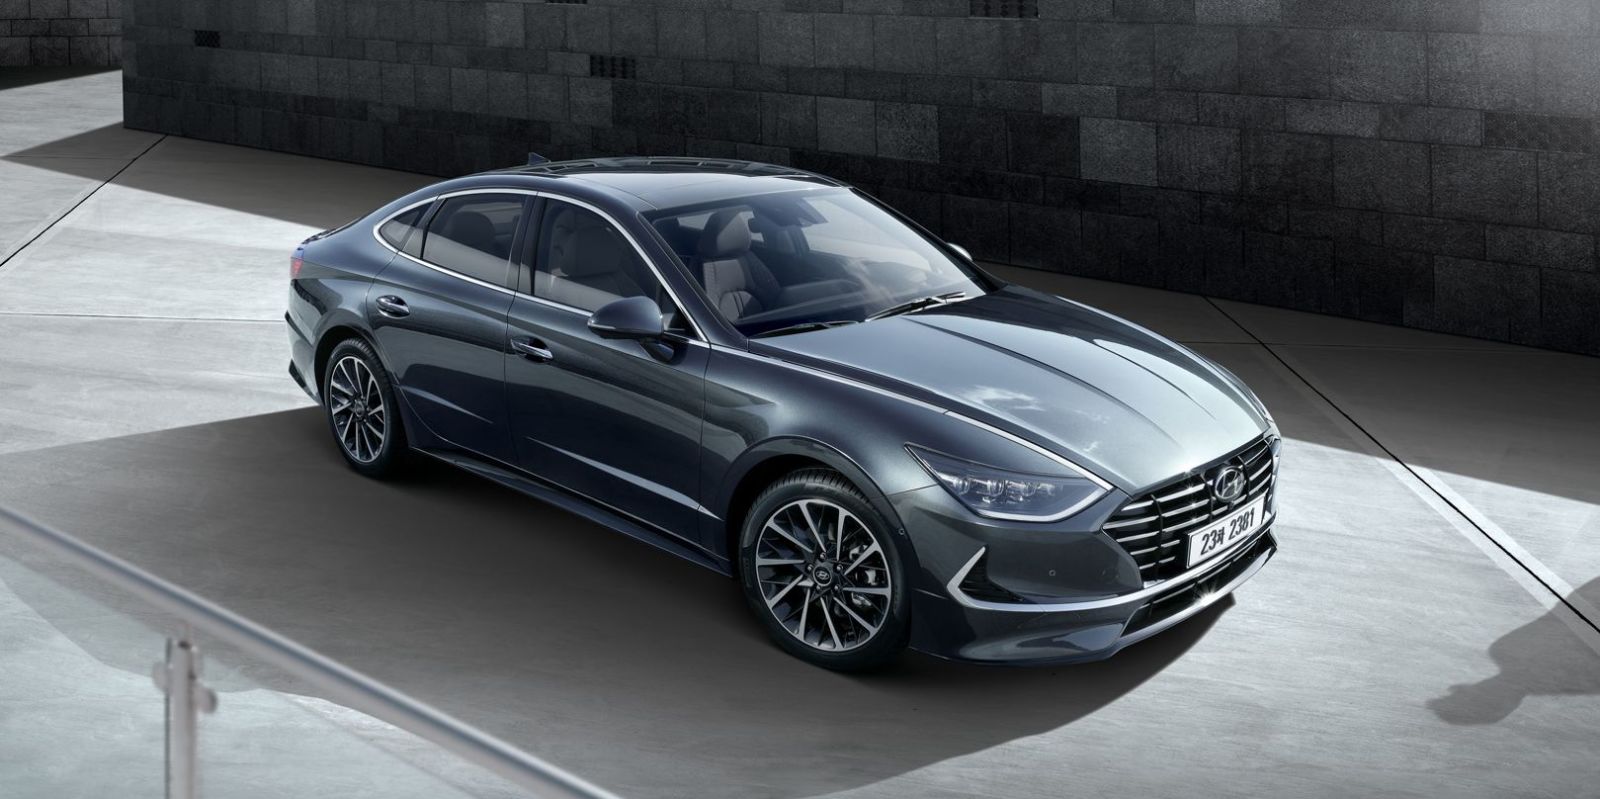 Illustration for article titled Heres the 2020 Hyundai Sonata